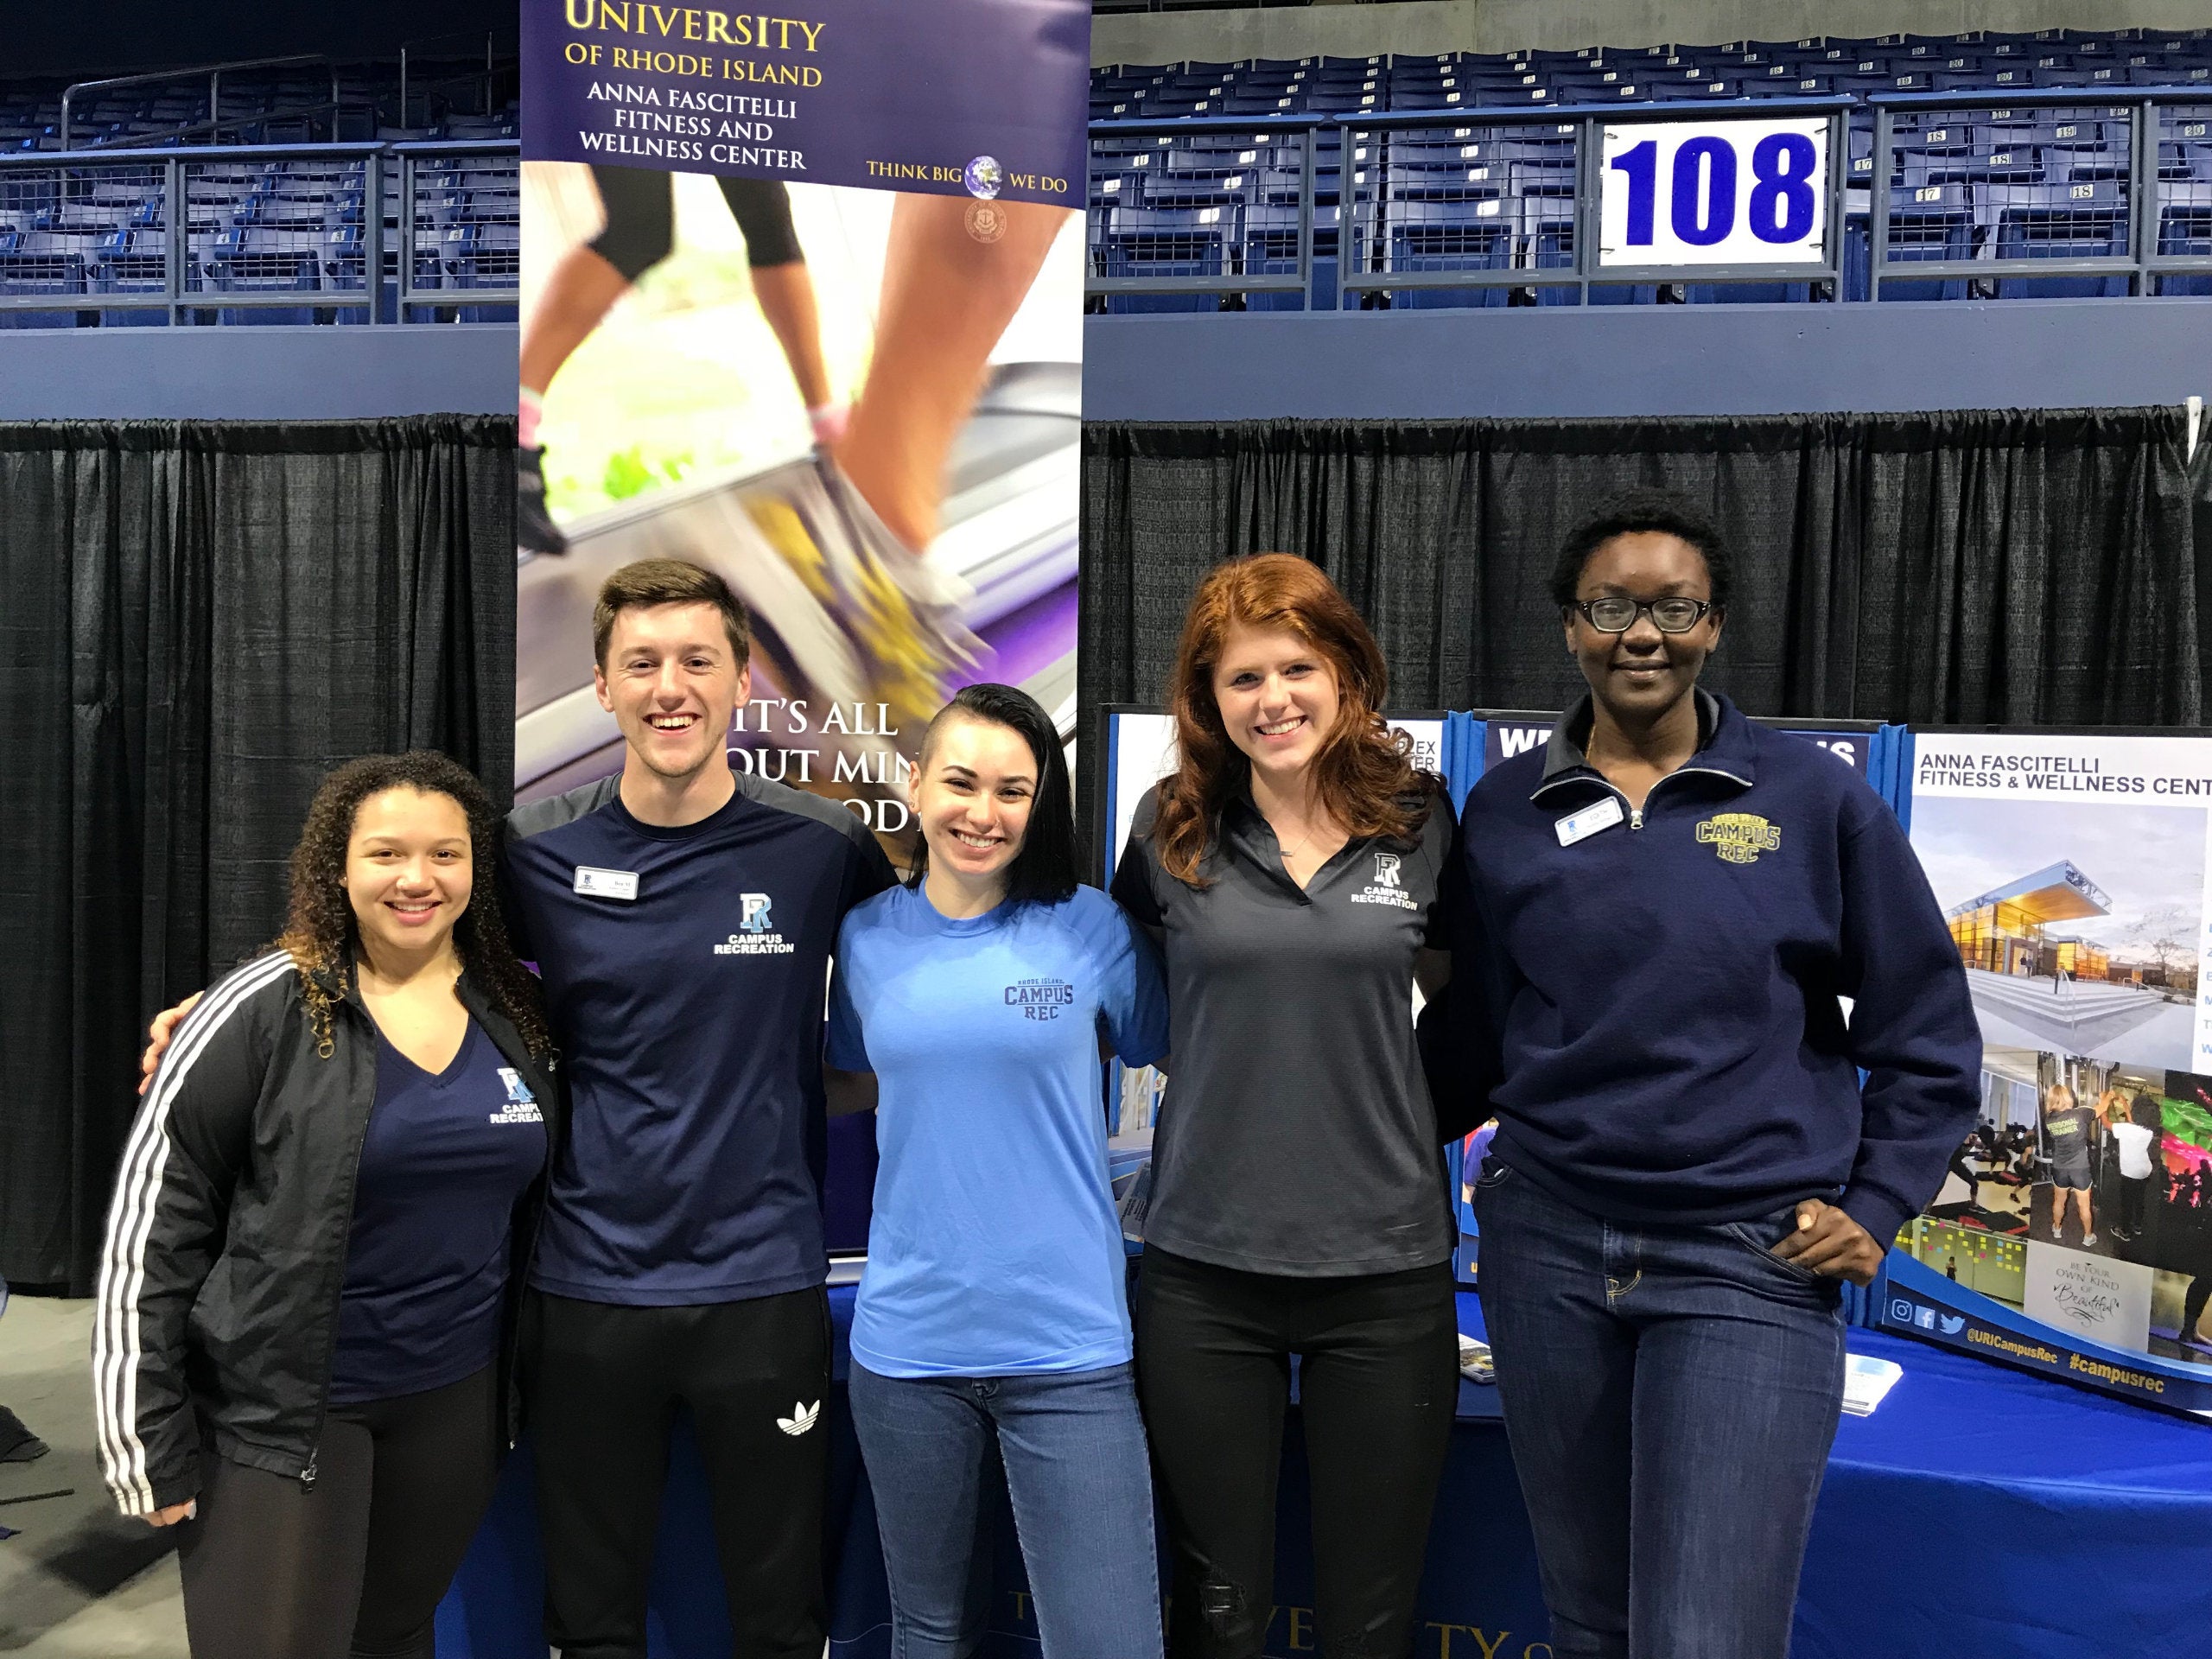 The Campus Rec team welcoming new students